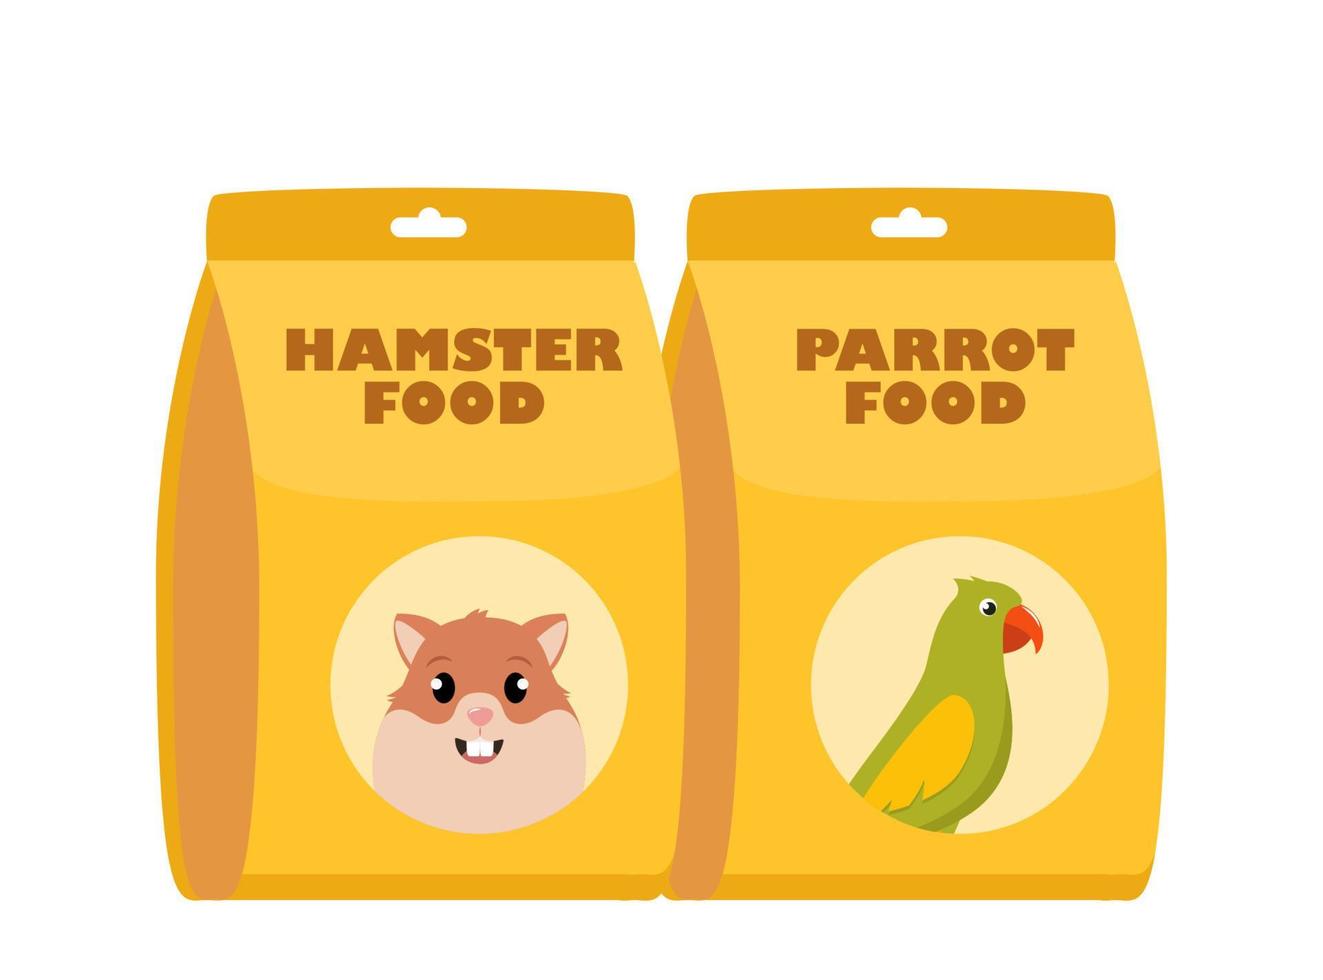 Parrot Food and Hamster food pack. Packages of dry food. Pet shop, domestic animal, care concept. Vector illustration.